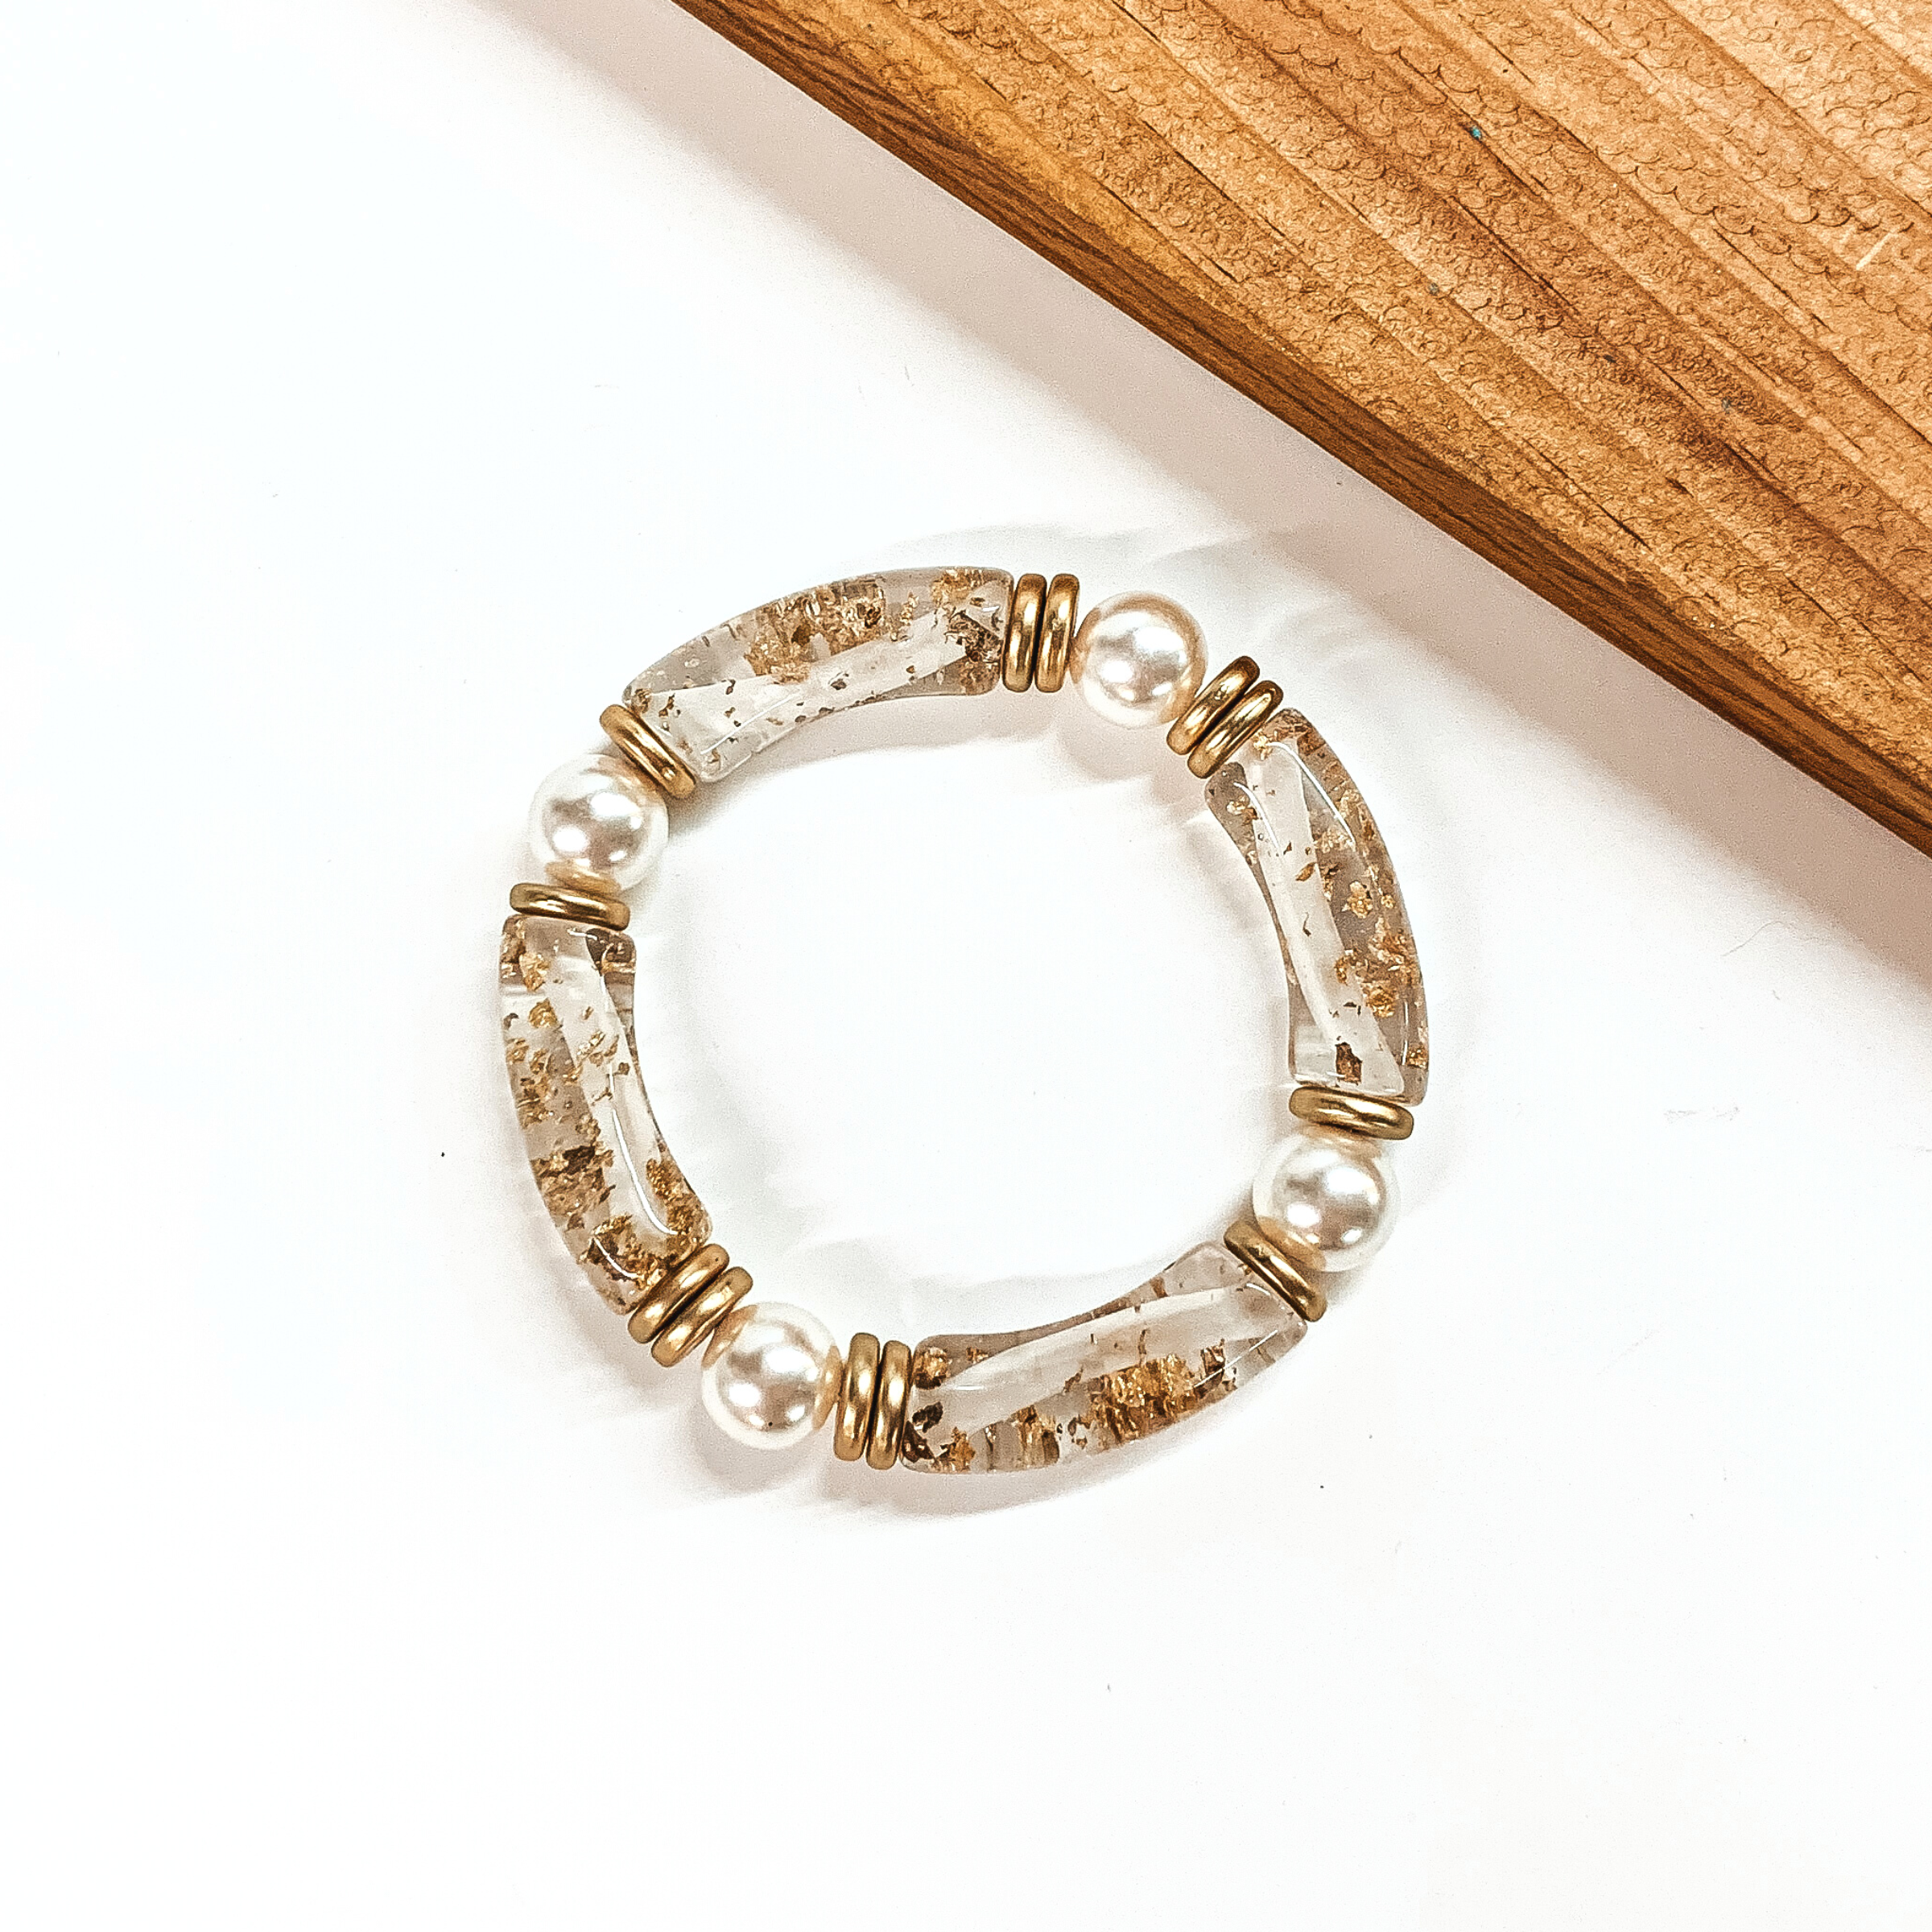 This is a clear tube bracelets with gold flakes inside and pearl spacers. This bracelet is taken on a white background with a slab of wood in the back as decor.